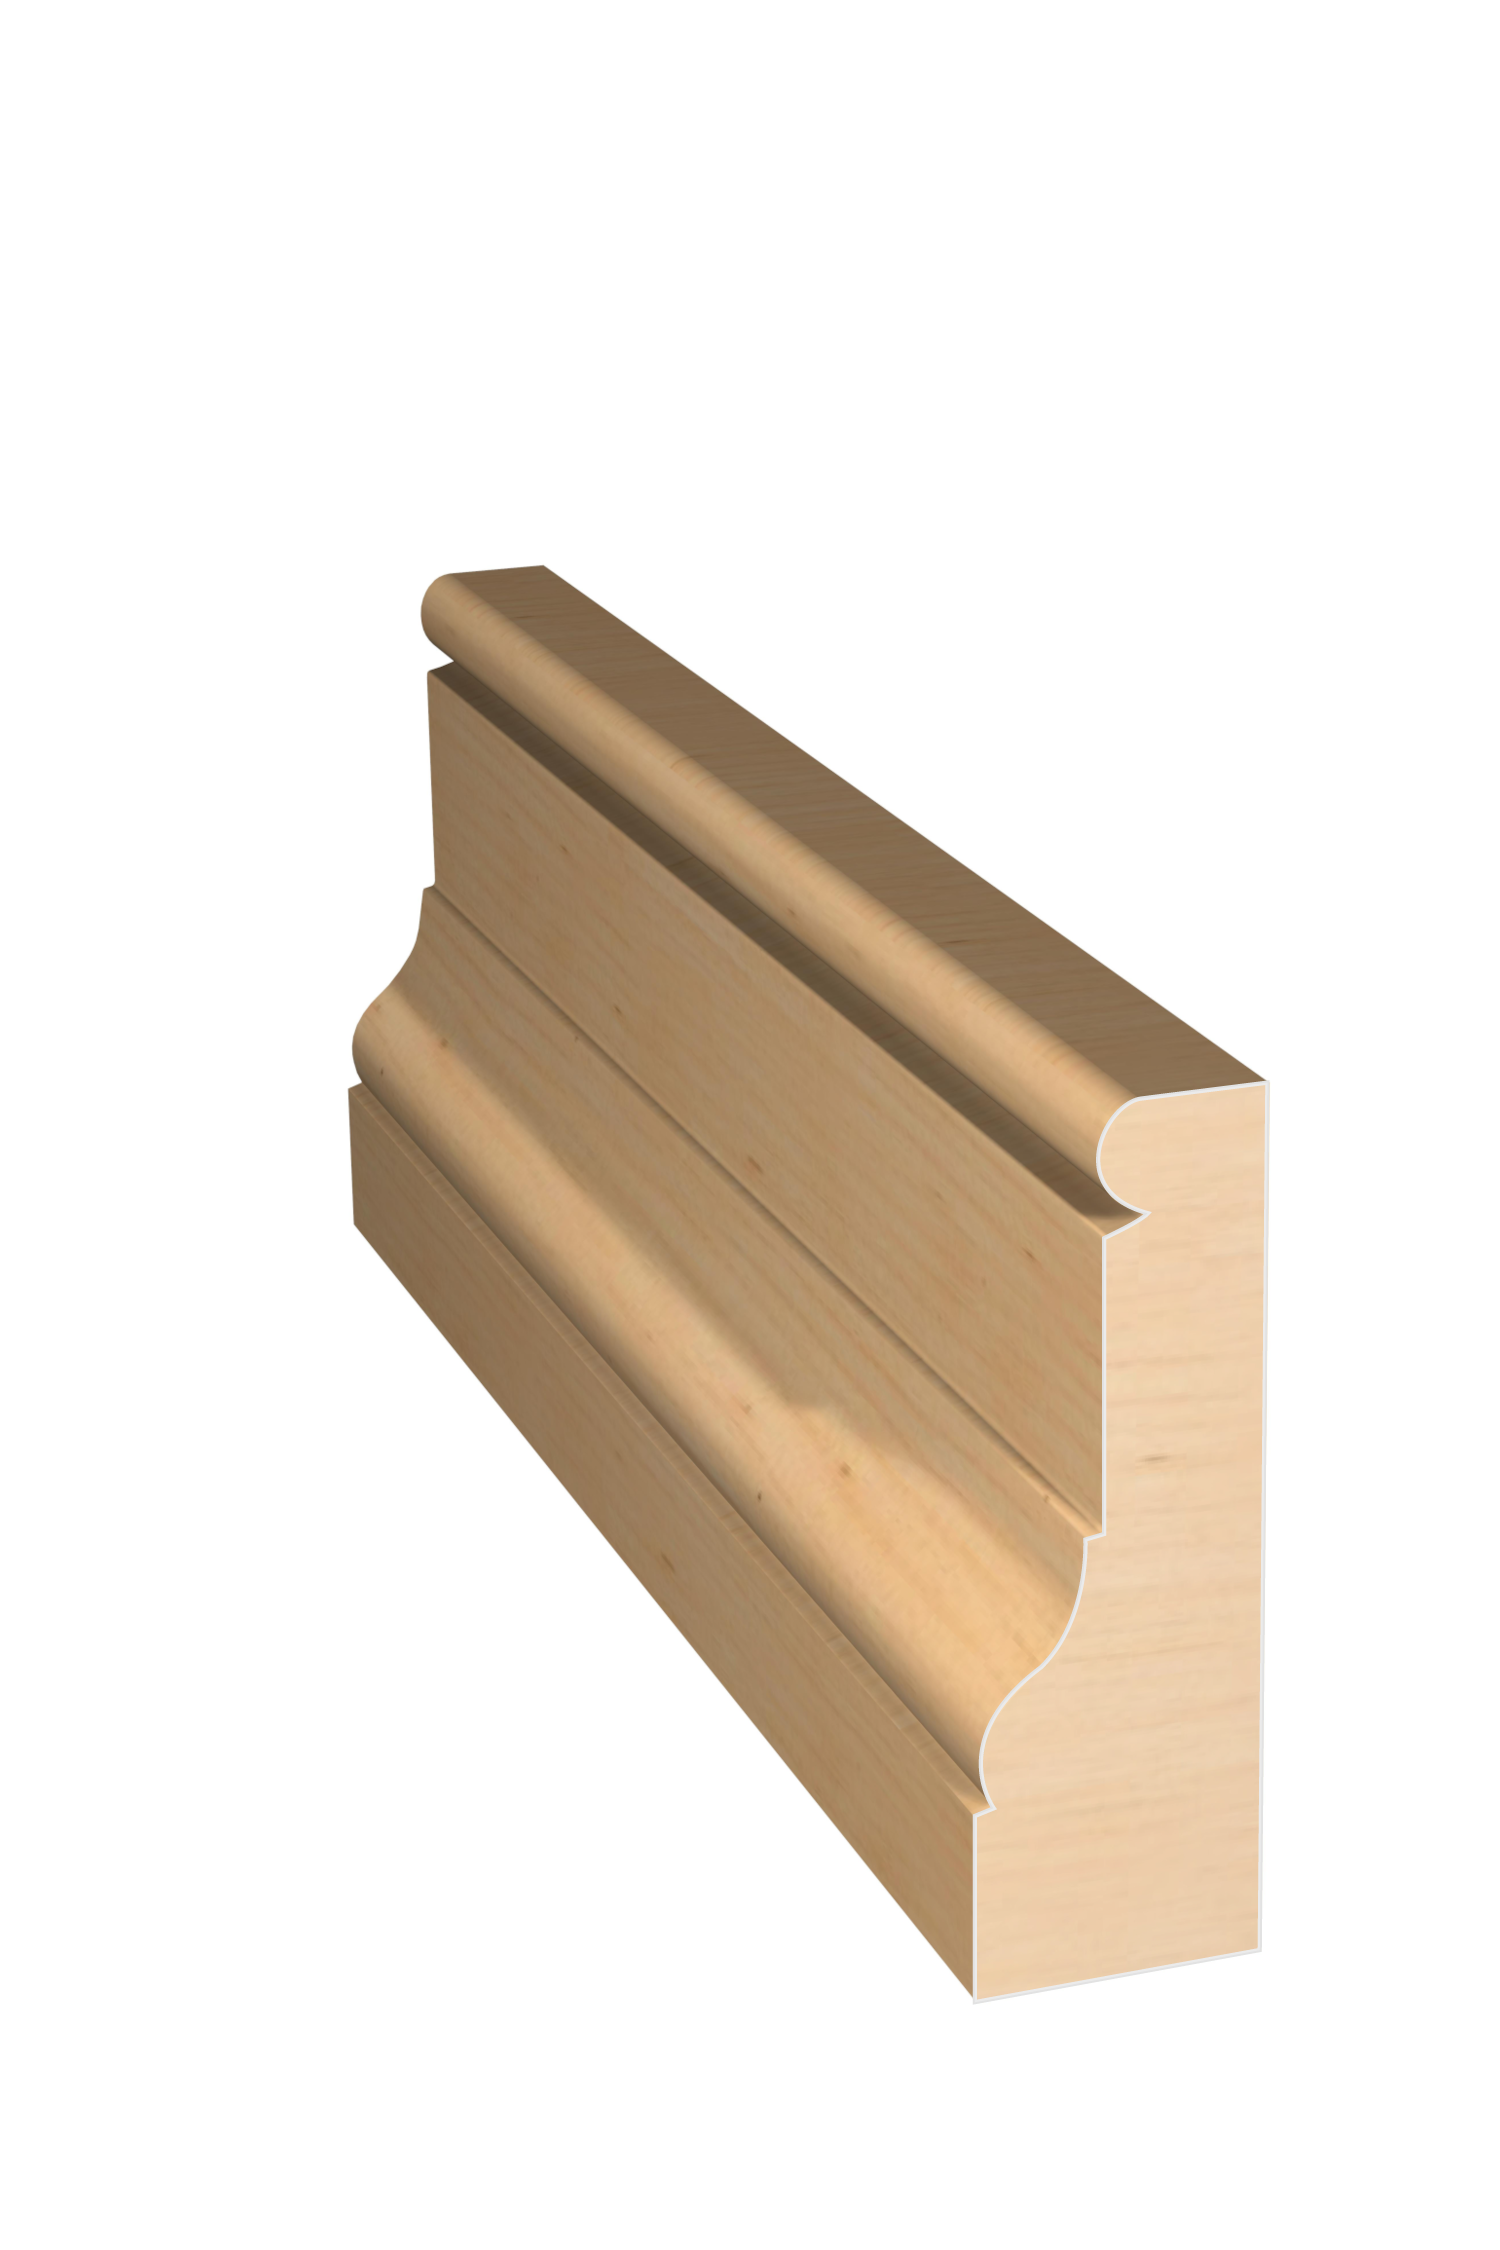 Three dimensional rendering of custom casing wood molding CAPL21421 made by Public Lumber Company in Detroit.